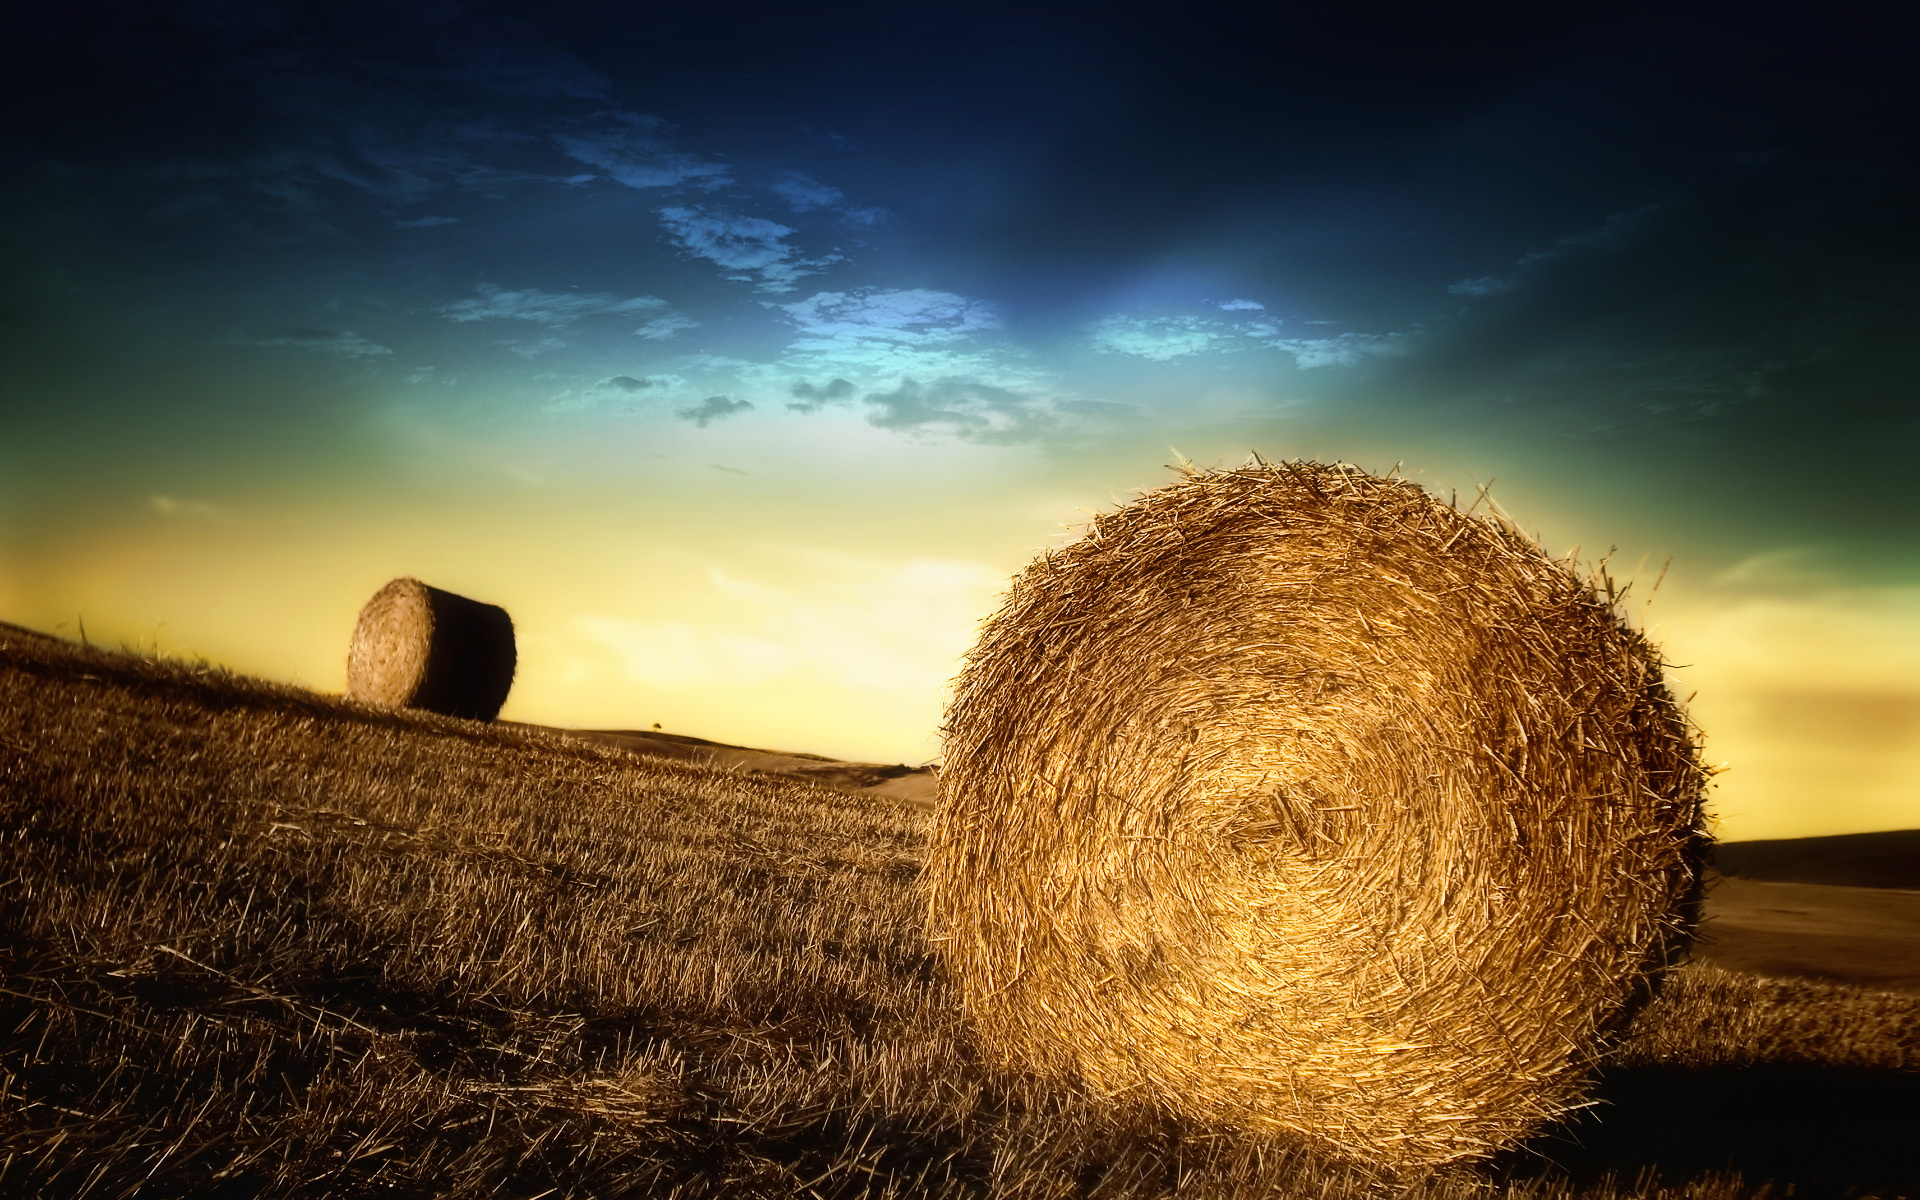 Bales Of Straw Wallpaper And Image Pictures Photos